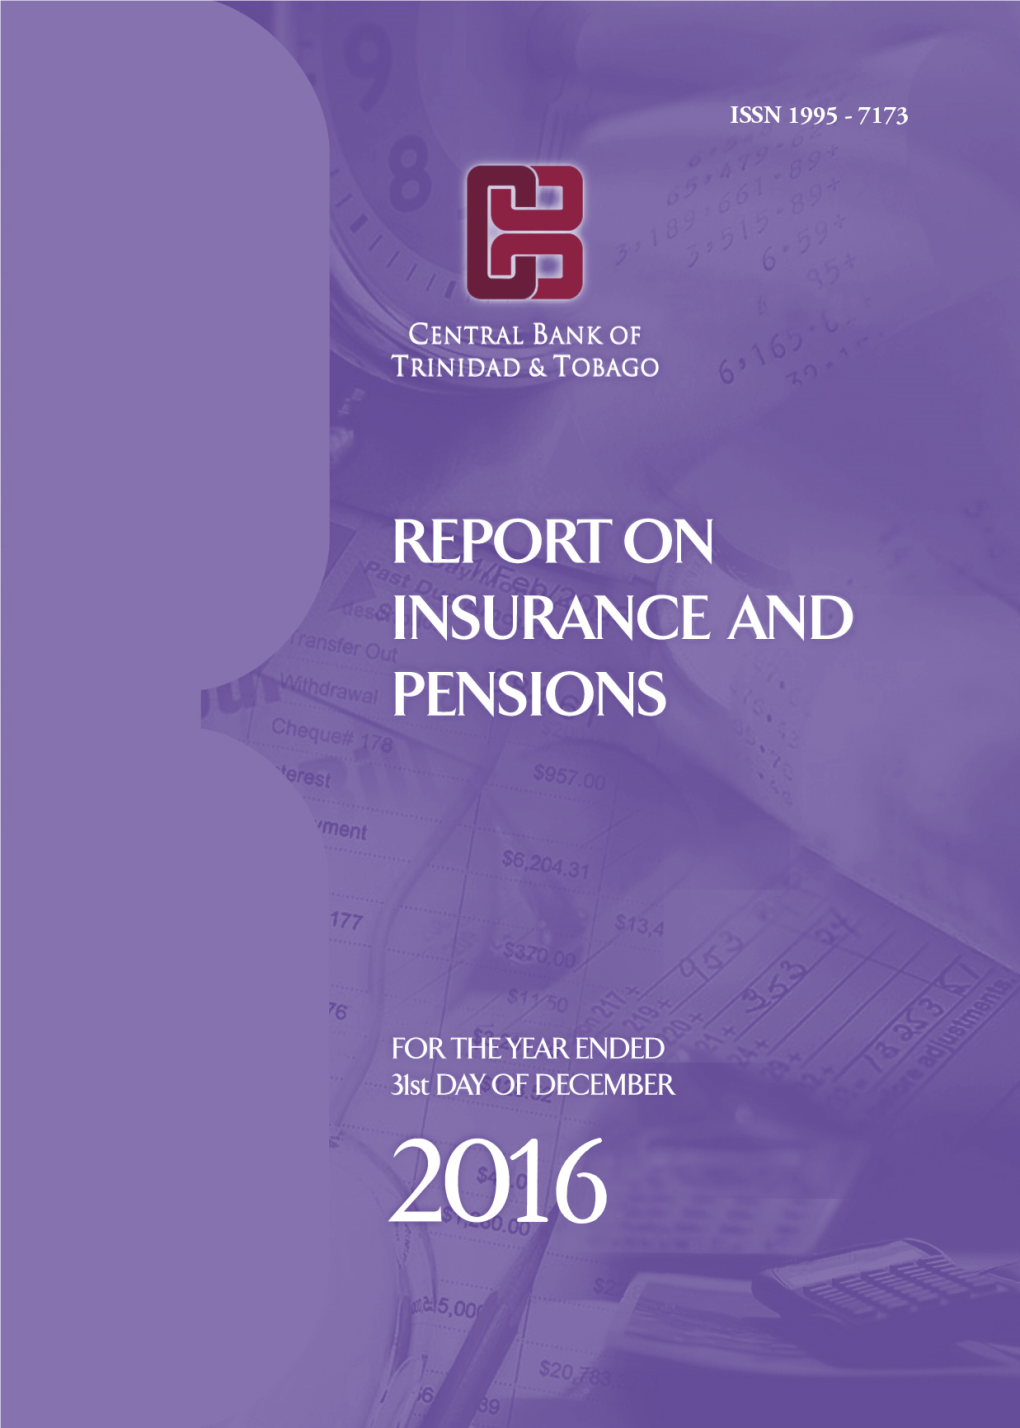 Annual Report on Insurance and Pensions 2016